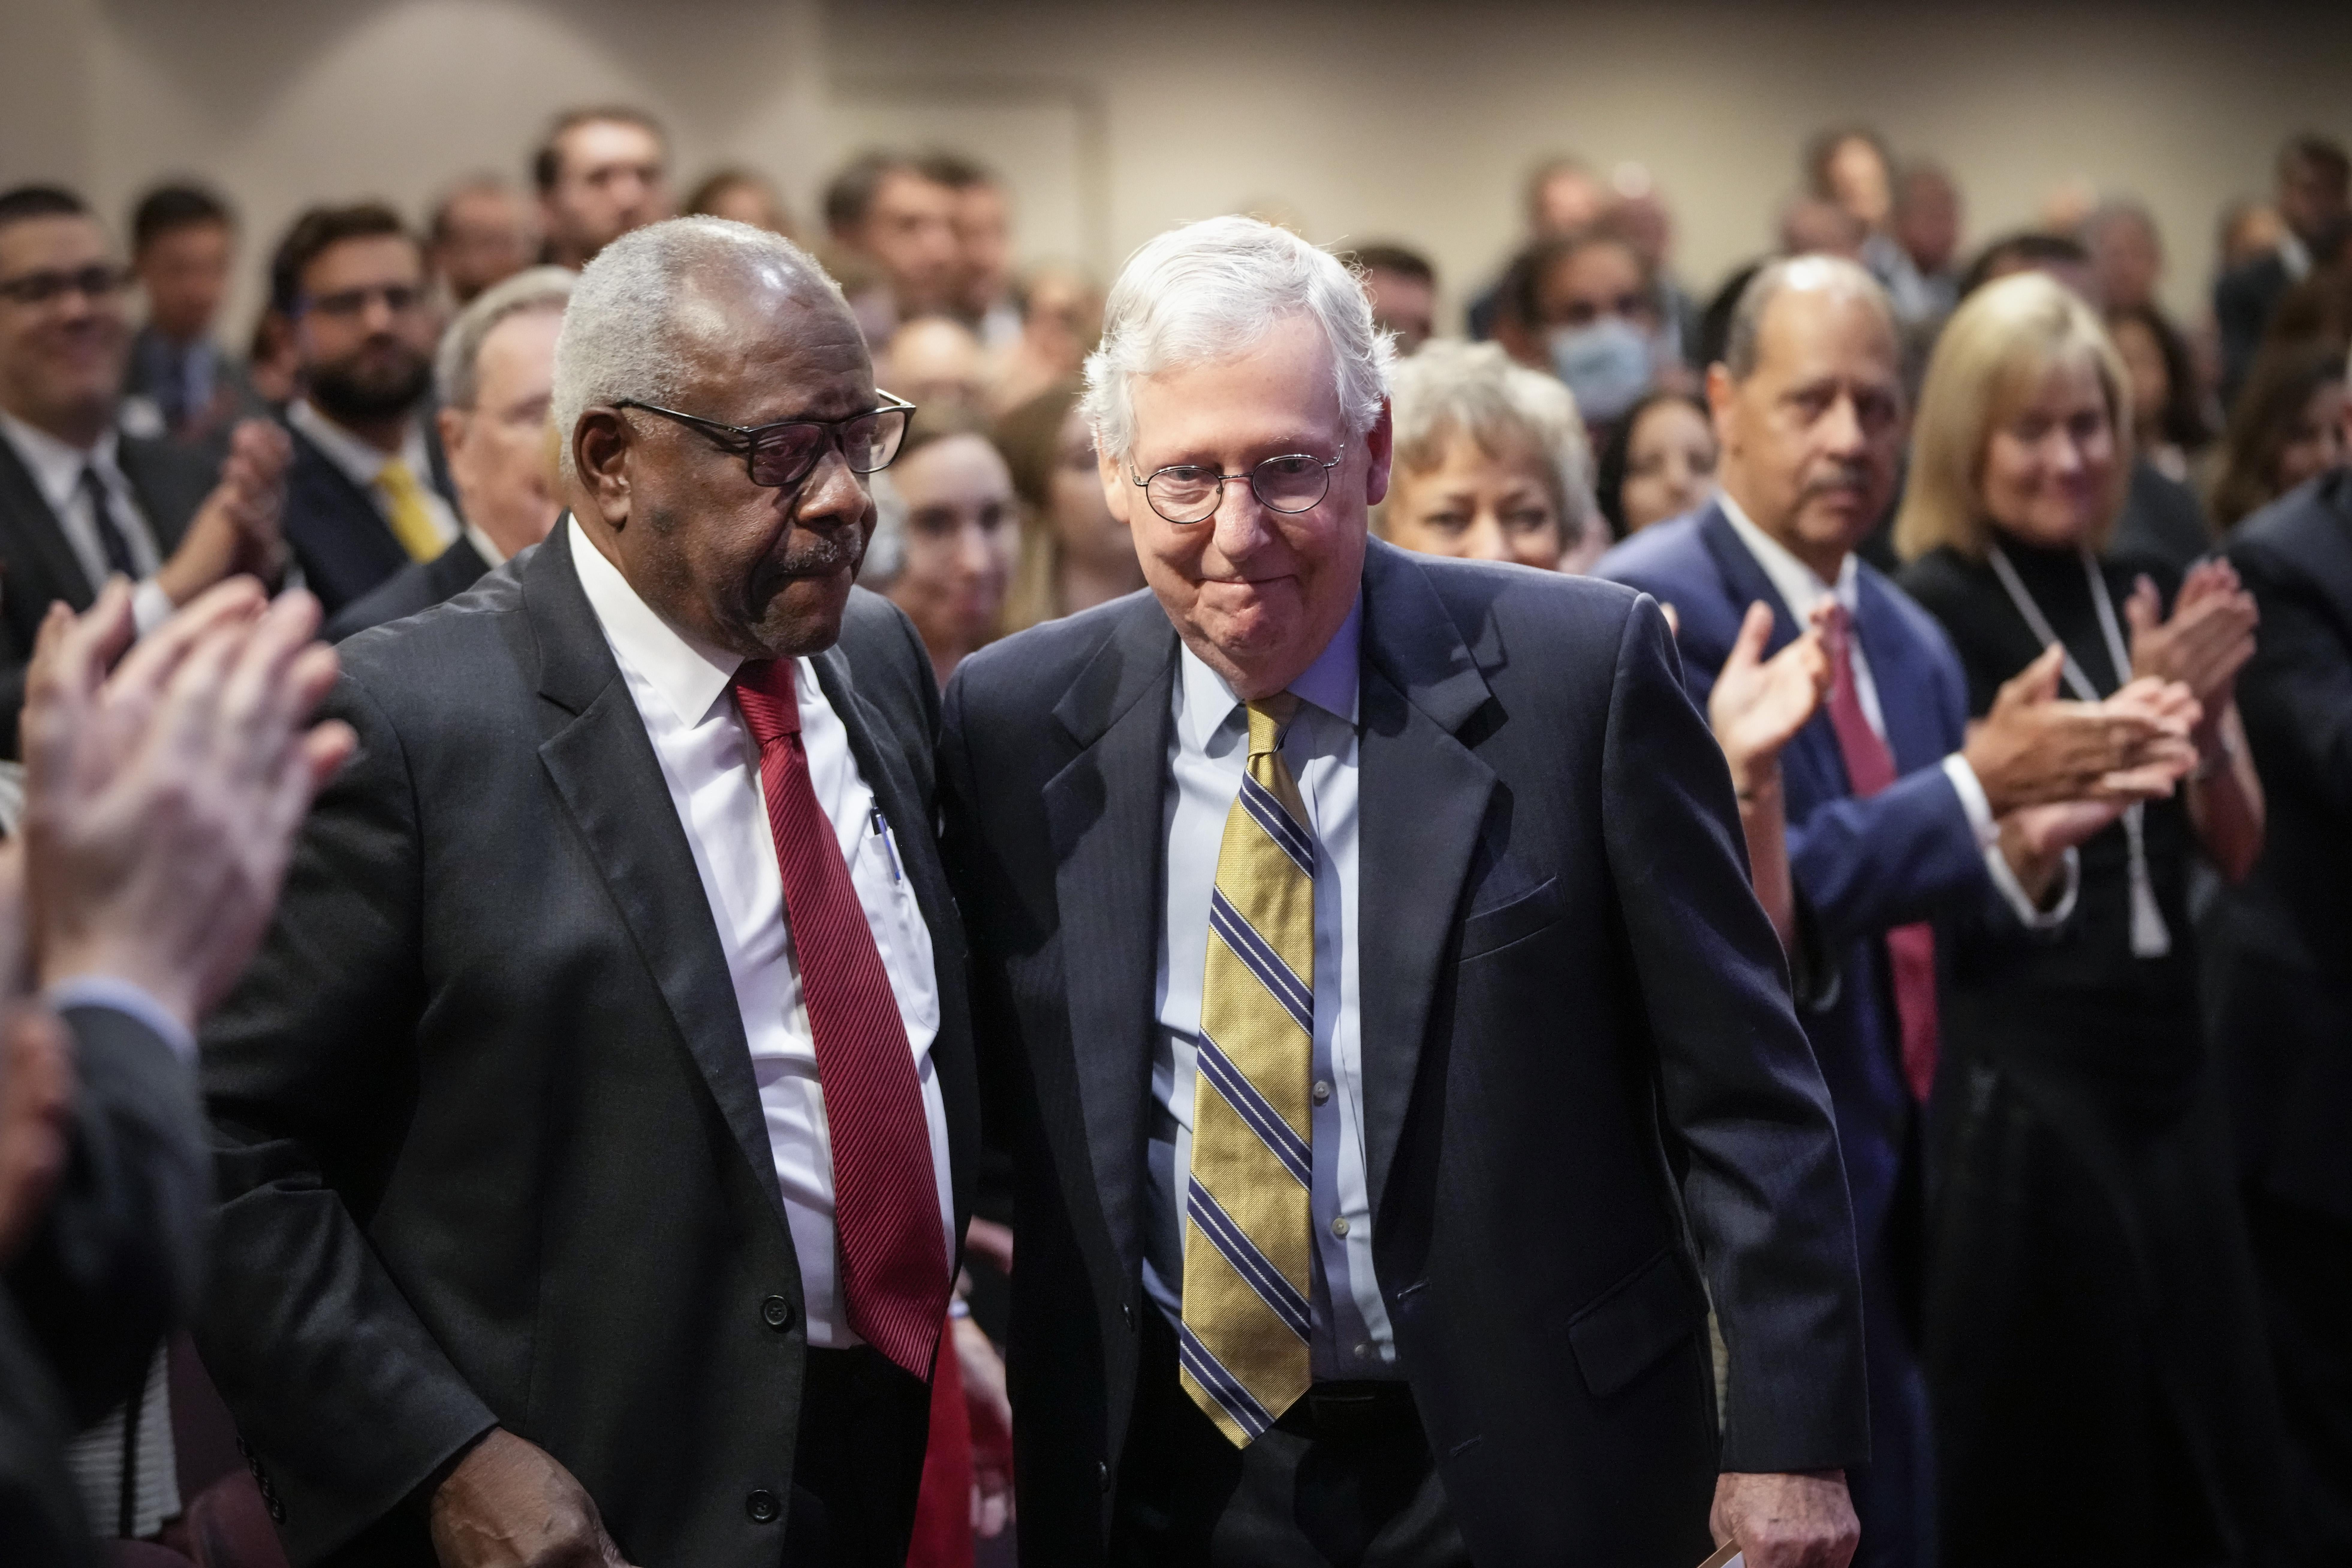 Thomas and McConnell standing close to each other in a crowded room of people clapping